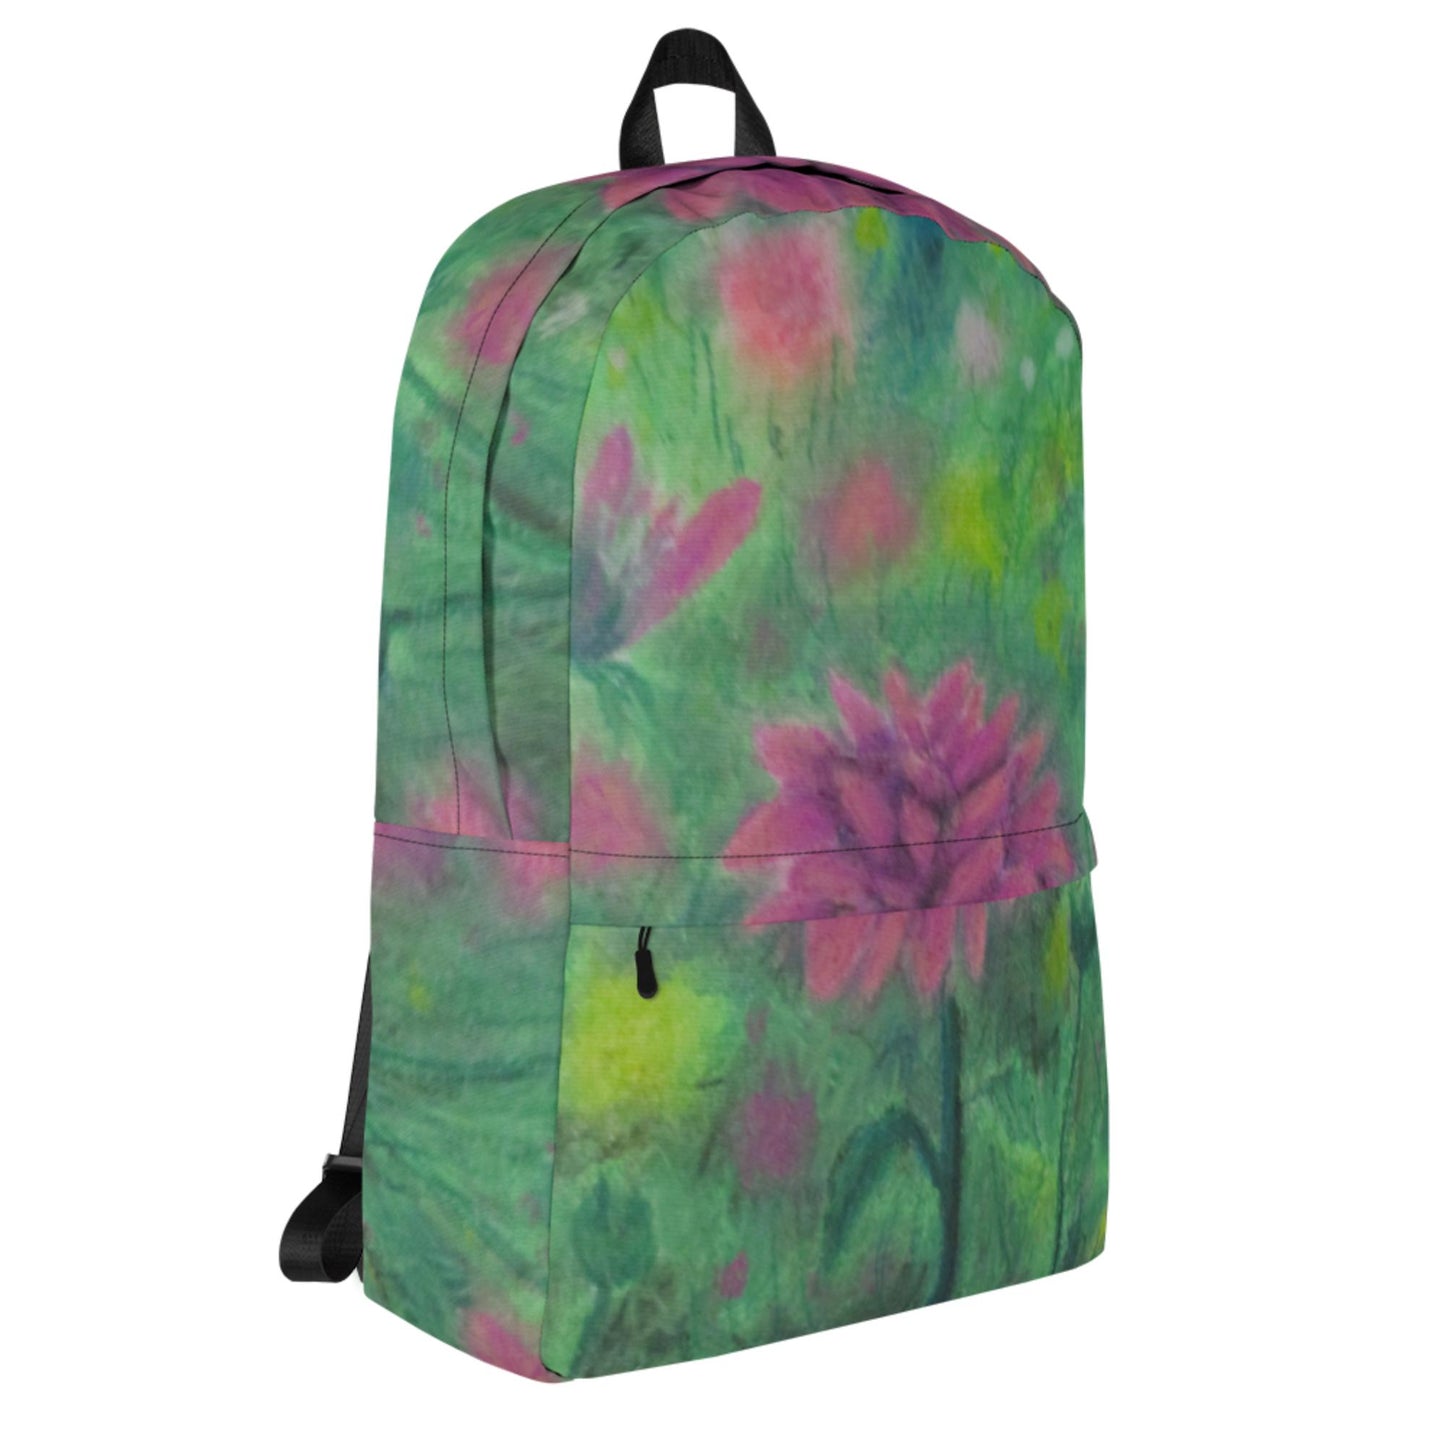 Dreaming of Dahlias ~ Backpack